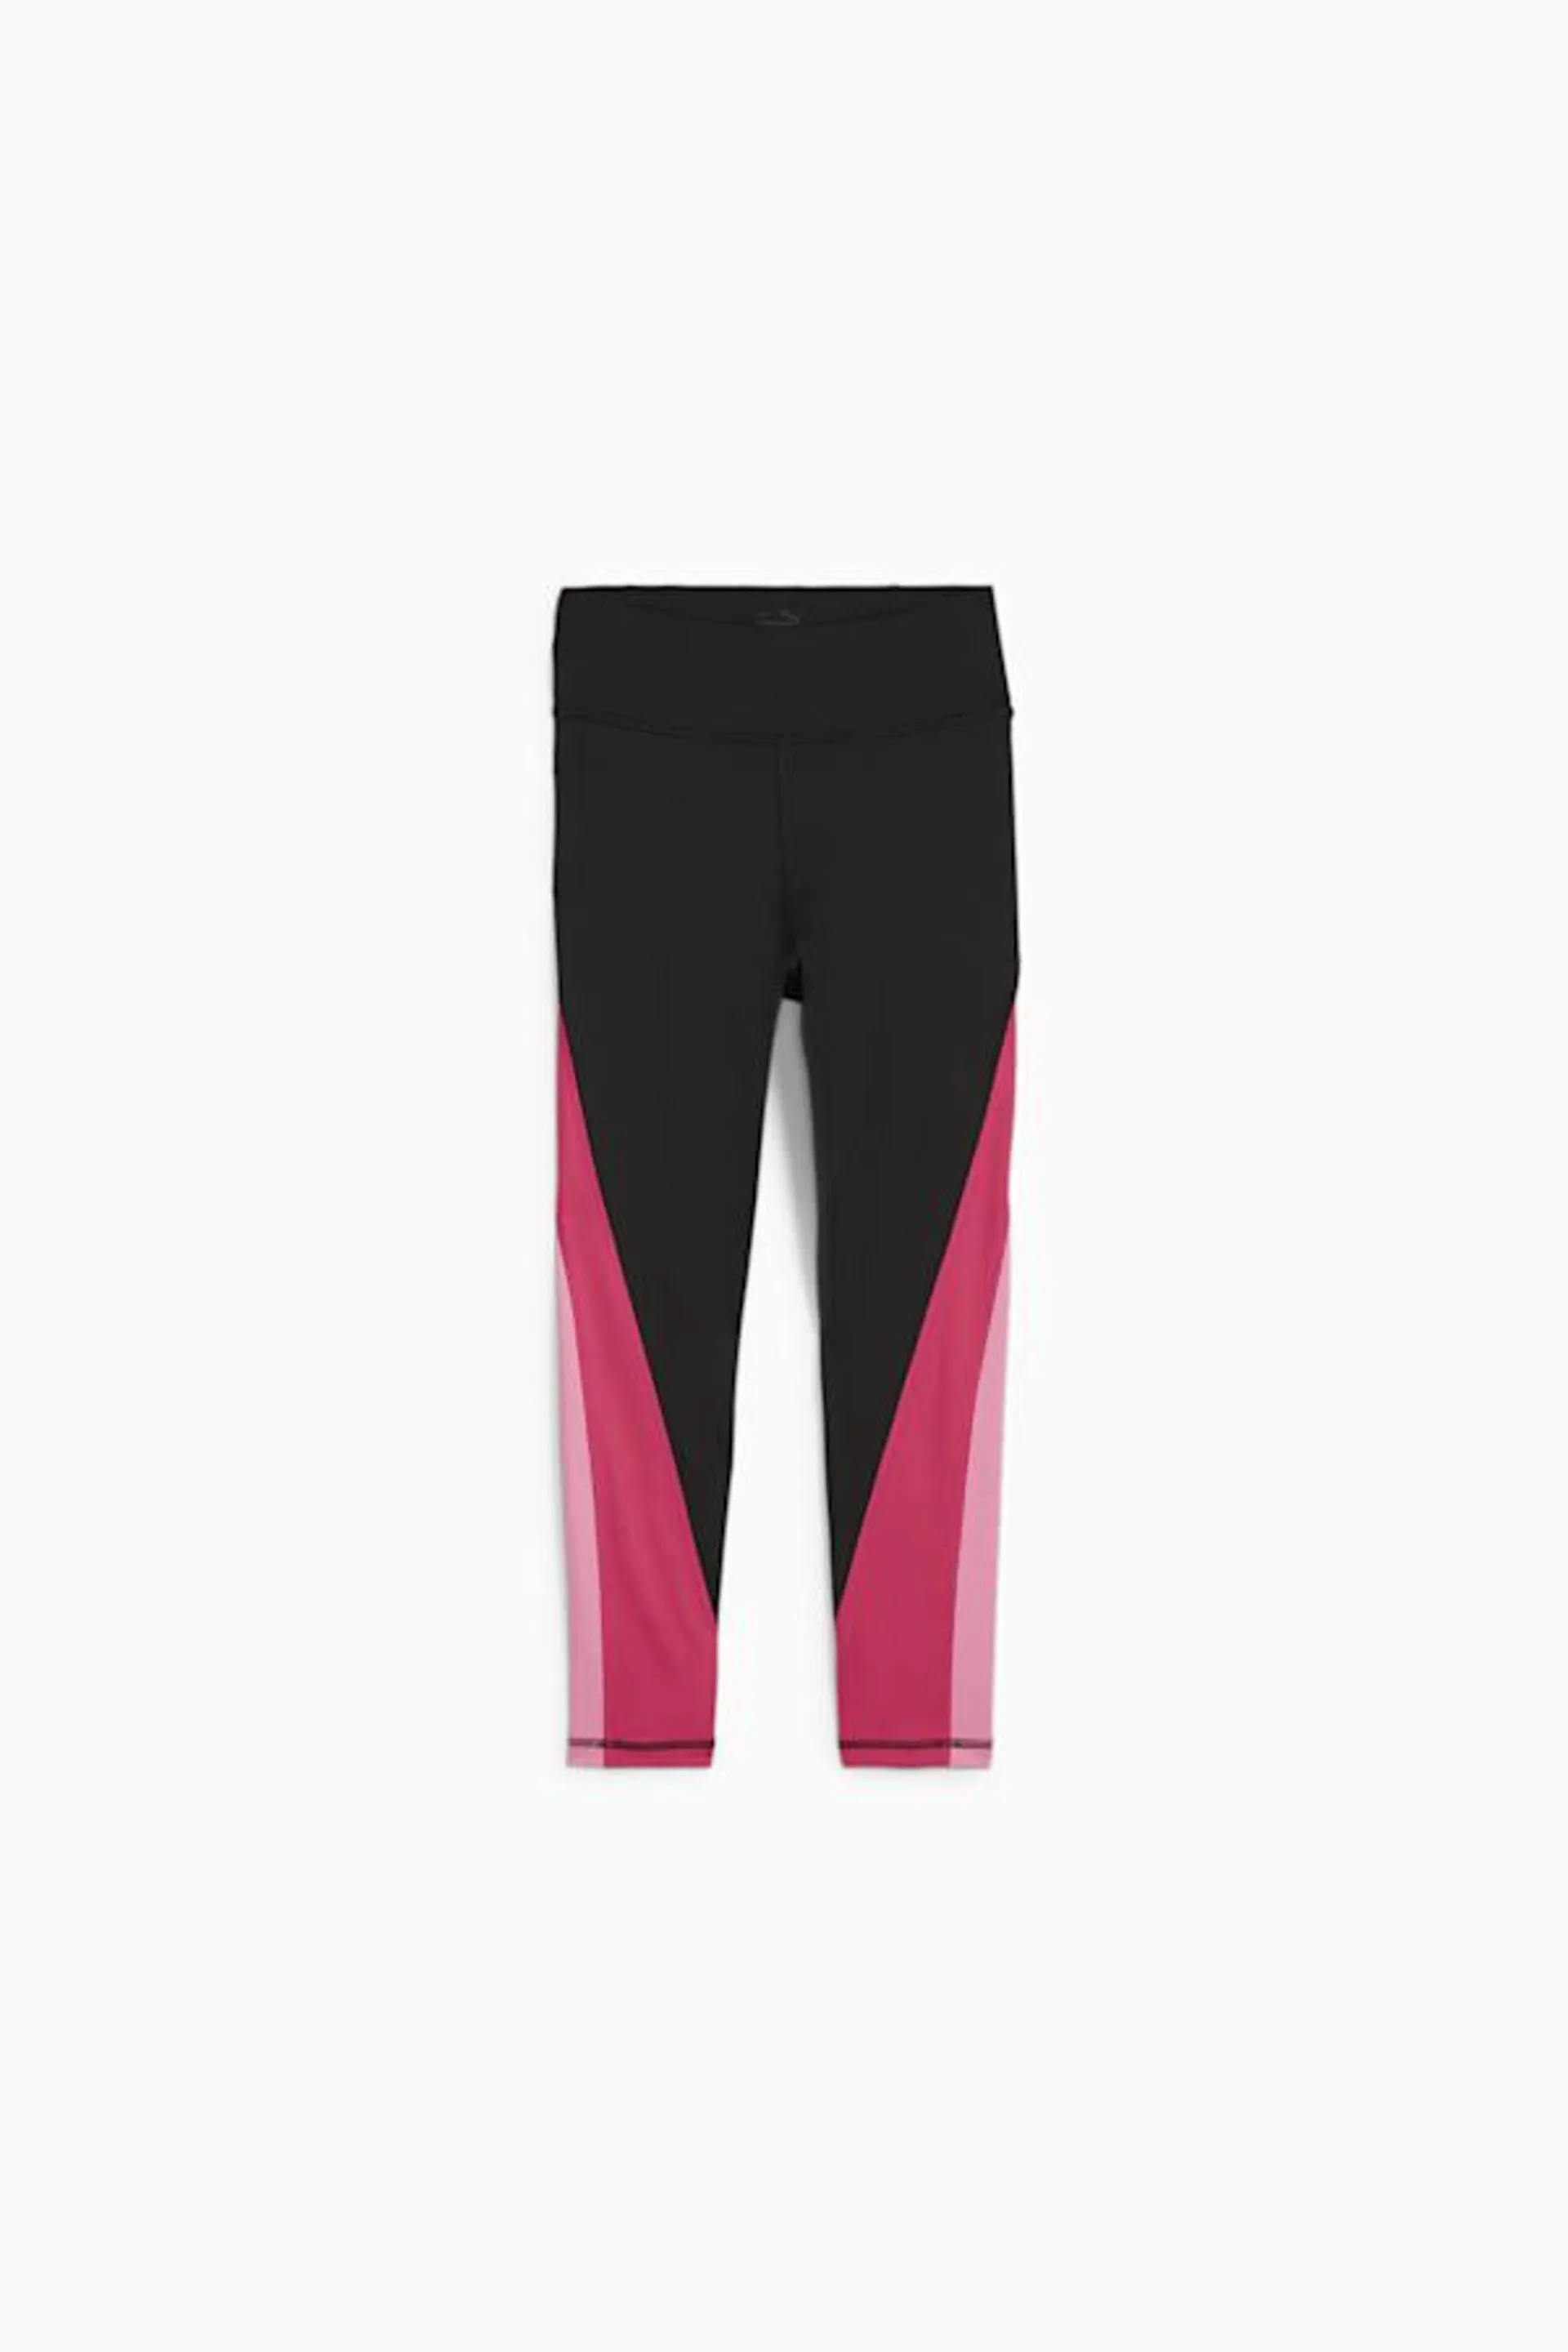 PUMA FIT Youth 7/8 Tights